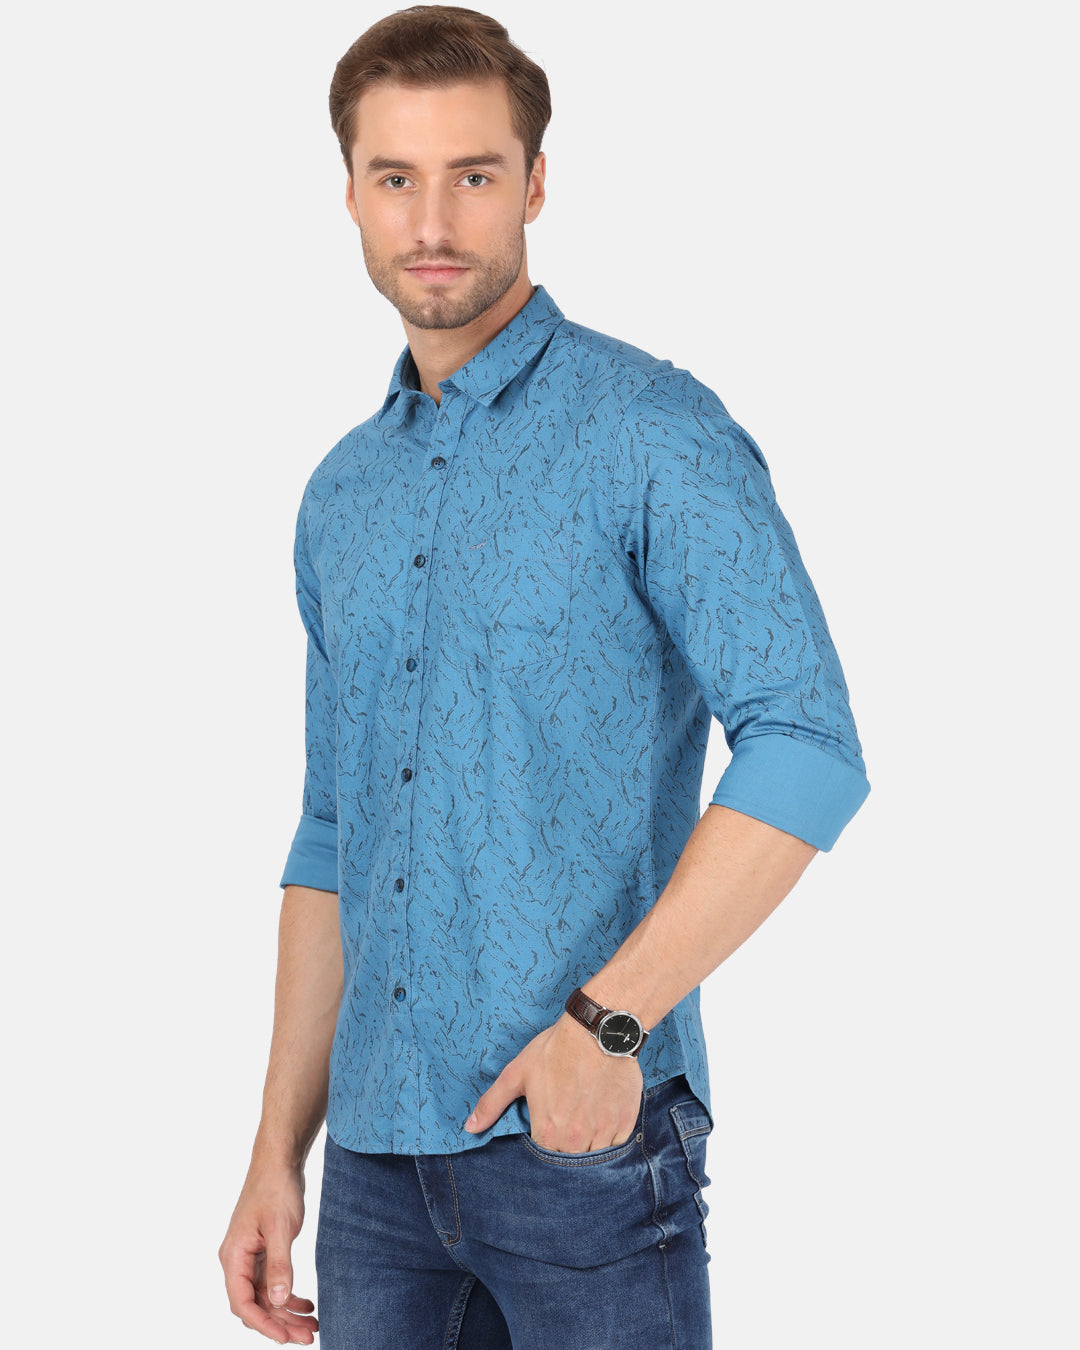 Crocodile Casual Full Sleeve Slim Fit Printed River Blue with Collar Shirt for Men